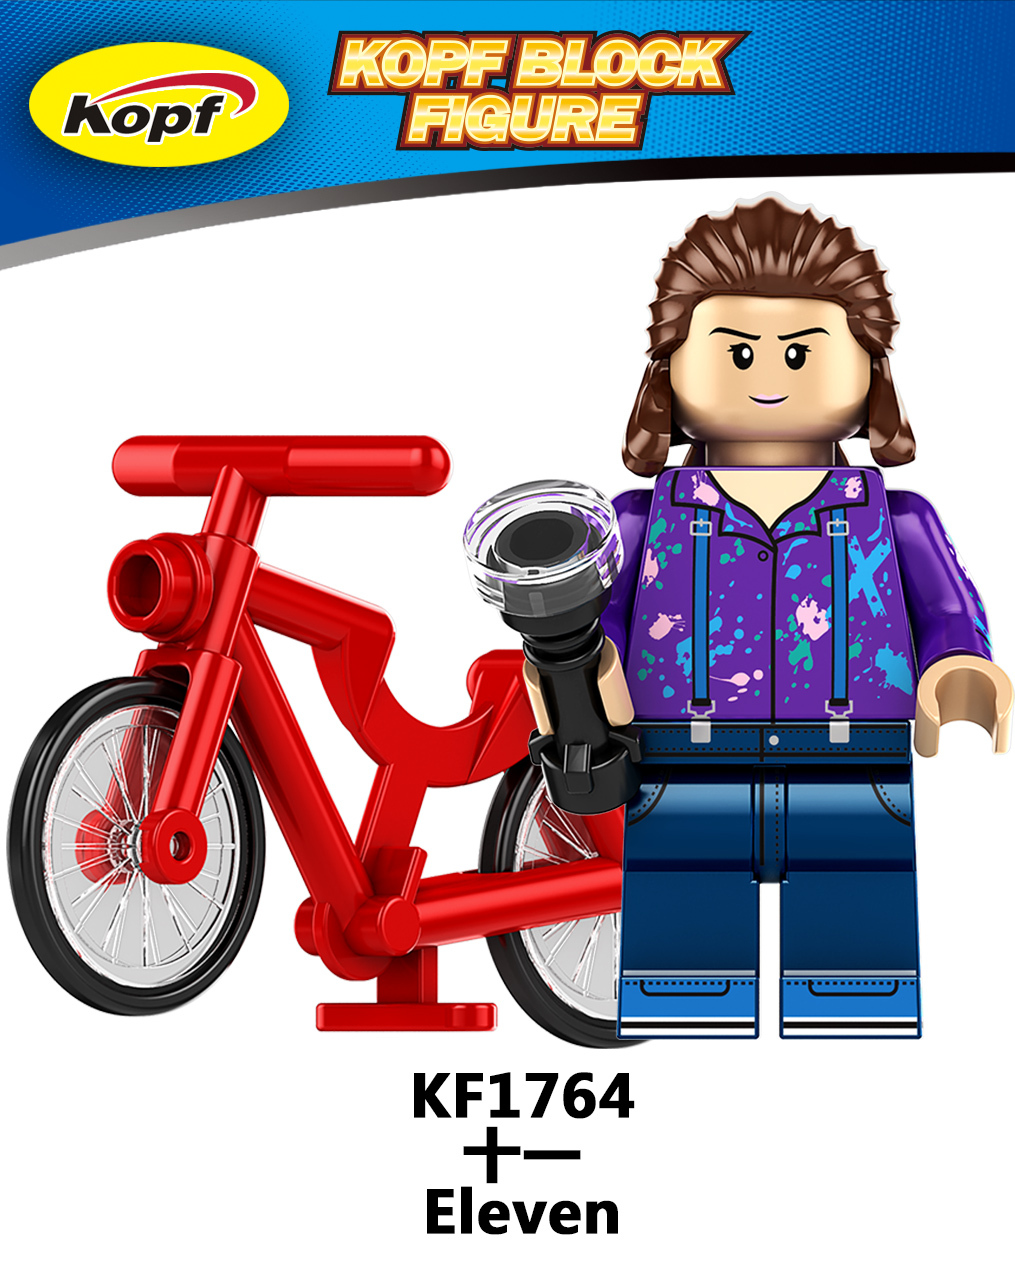 KF6167 KF1763 KF1764 KF1765 KF1766 KF1767 KF1768 KF1769 KF1770 CY1001 Stranger Things Mini Building Blocks Action Figures Educational Toys For Kids Gifts 